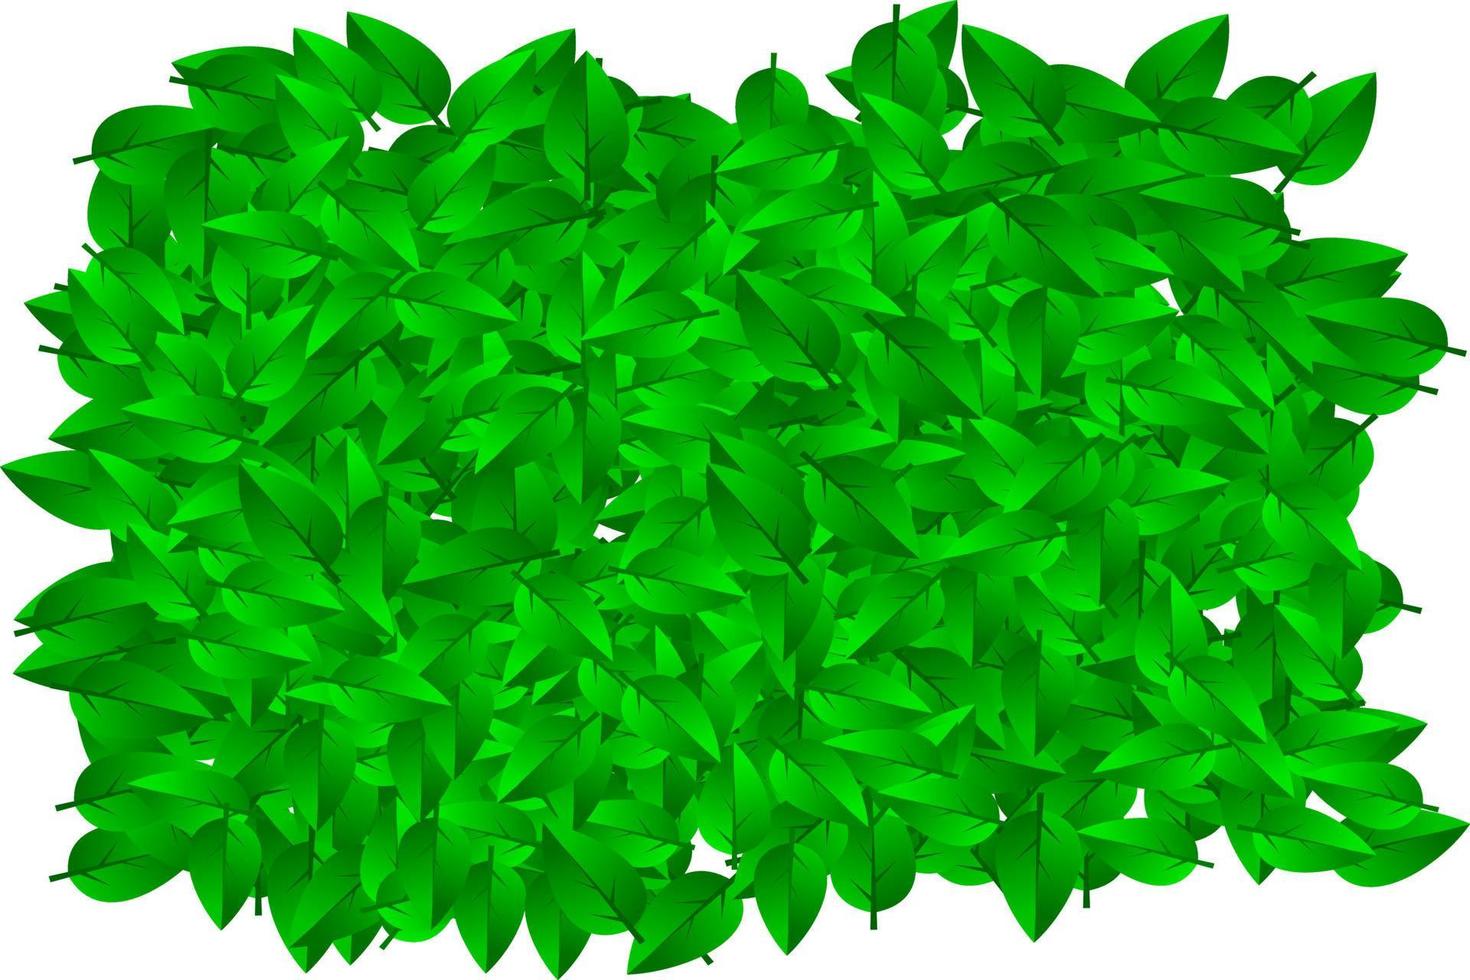 Green leaves texture vector